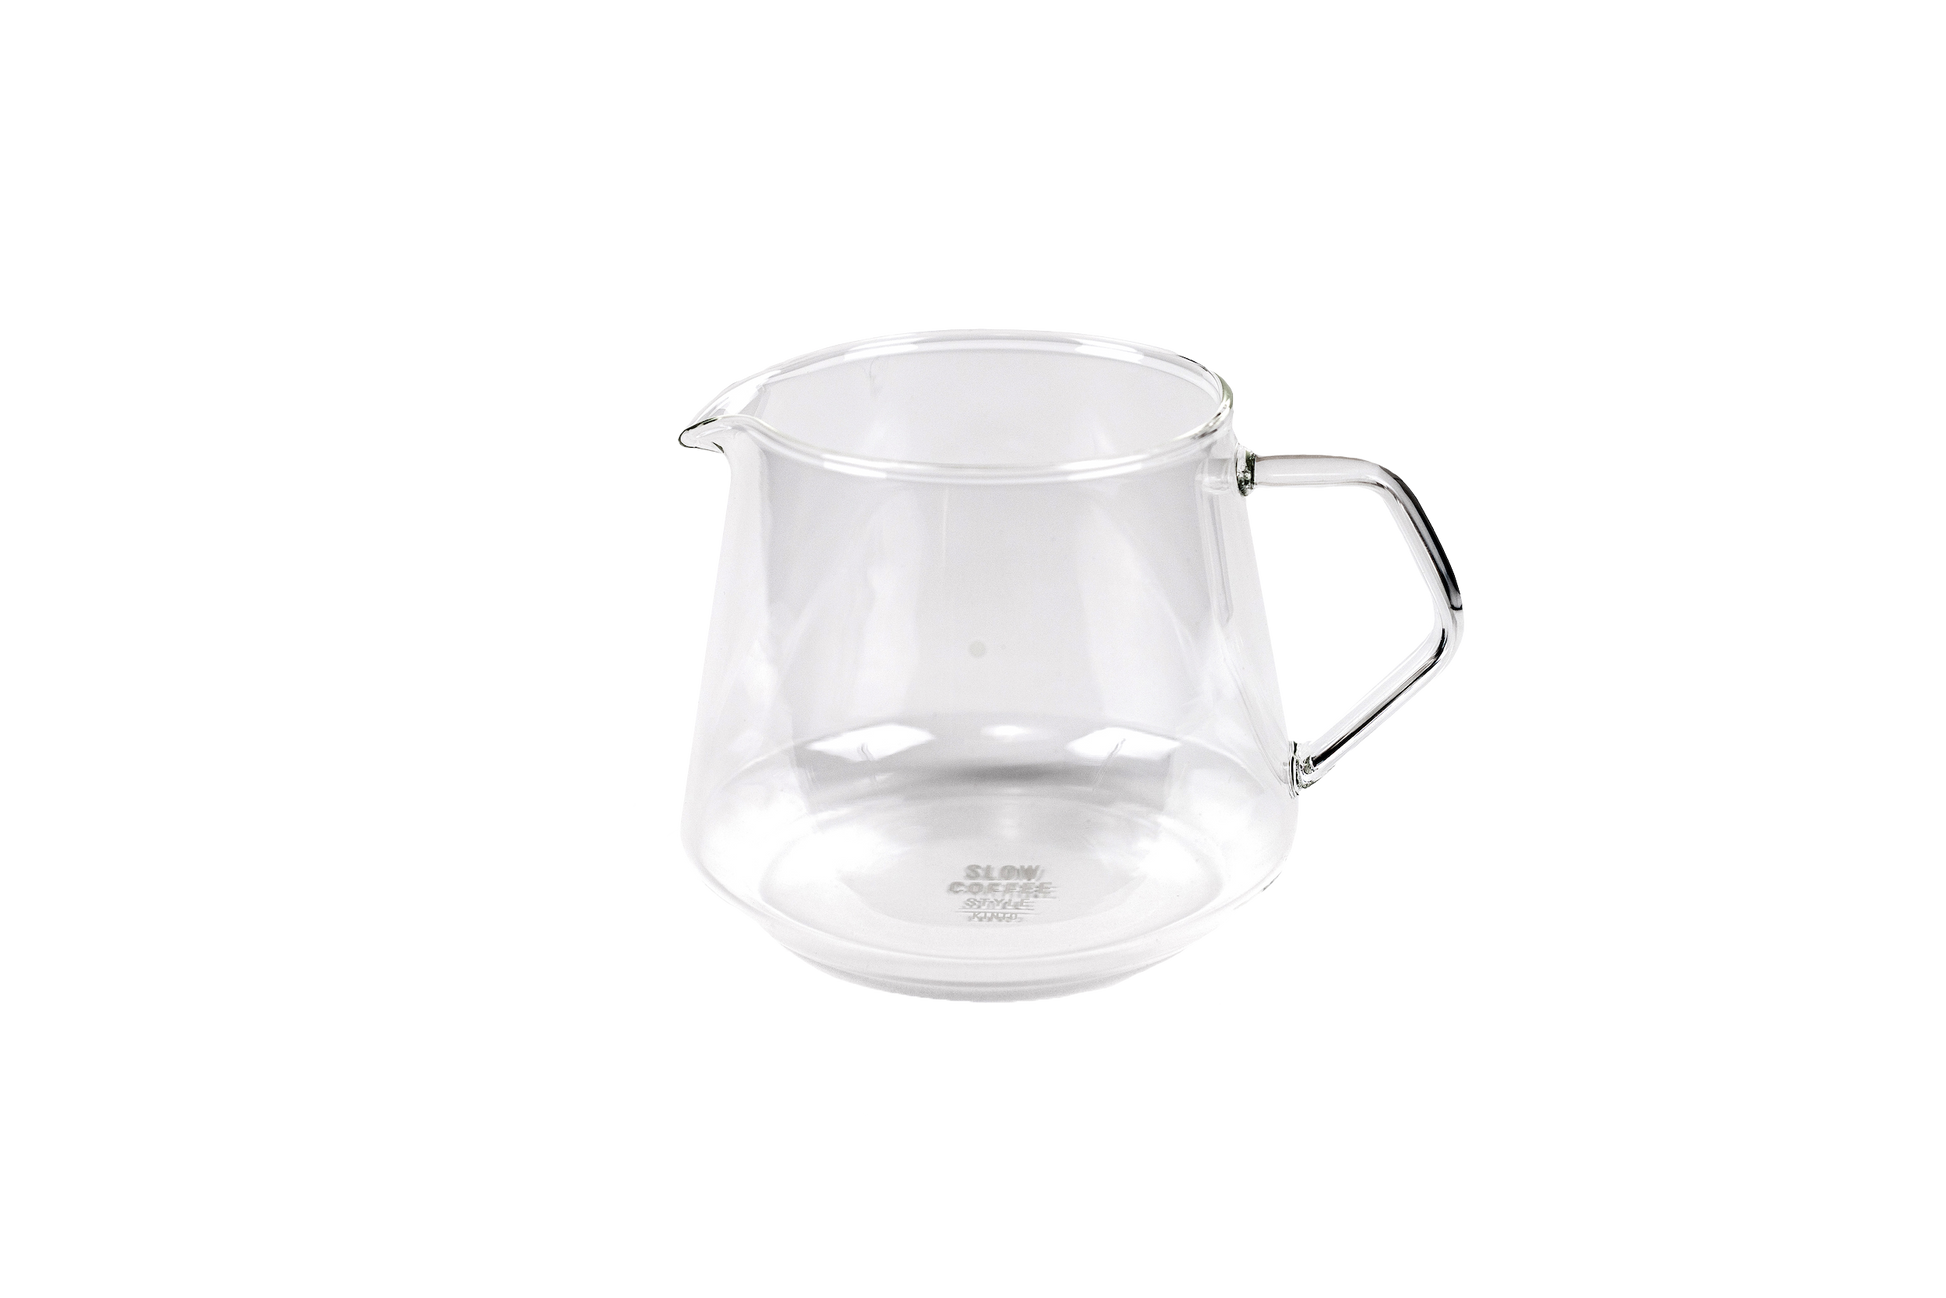 Elegantly designed by Kinto Japan, this 300ml heat resistant decanter is perfect for 1-cup brews. 